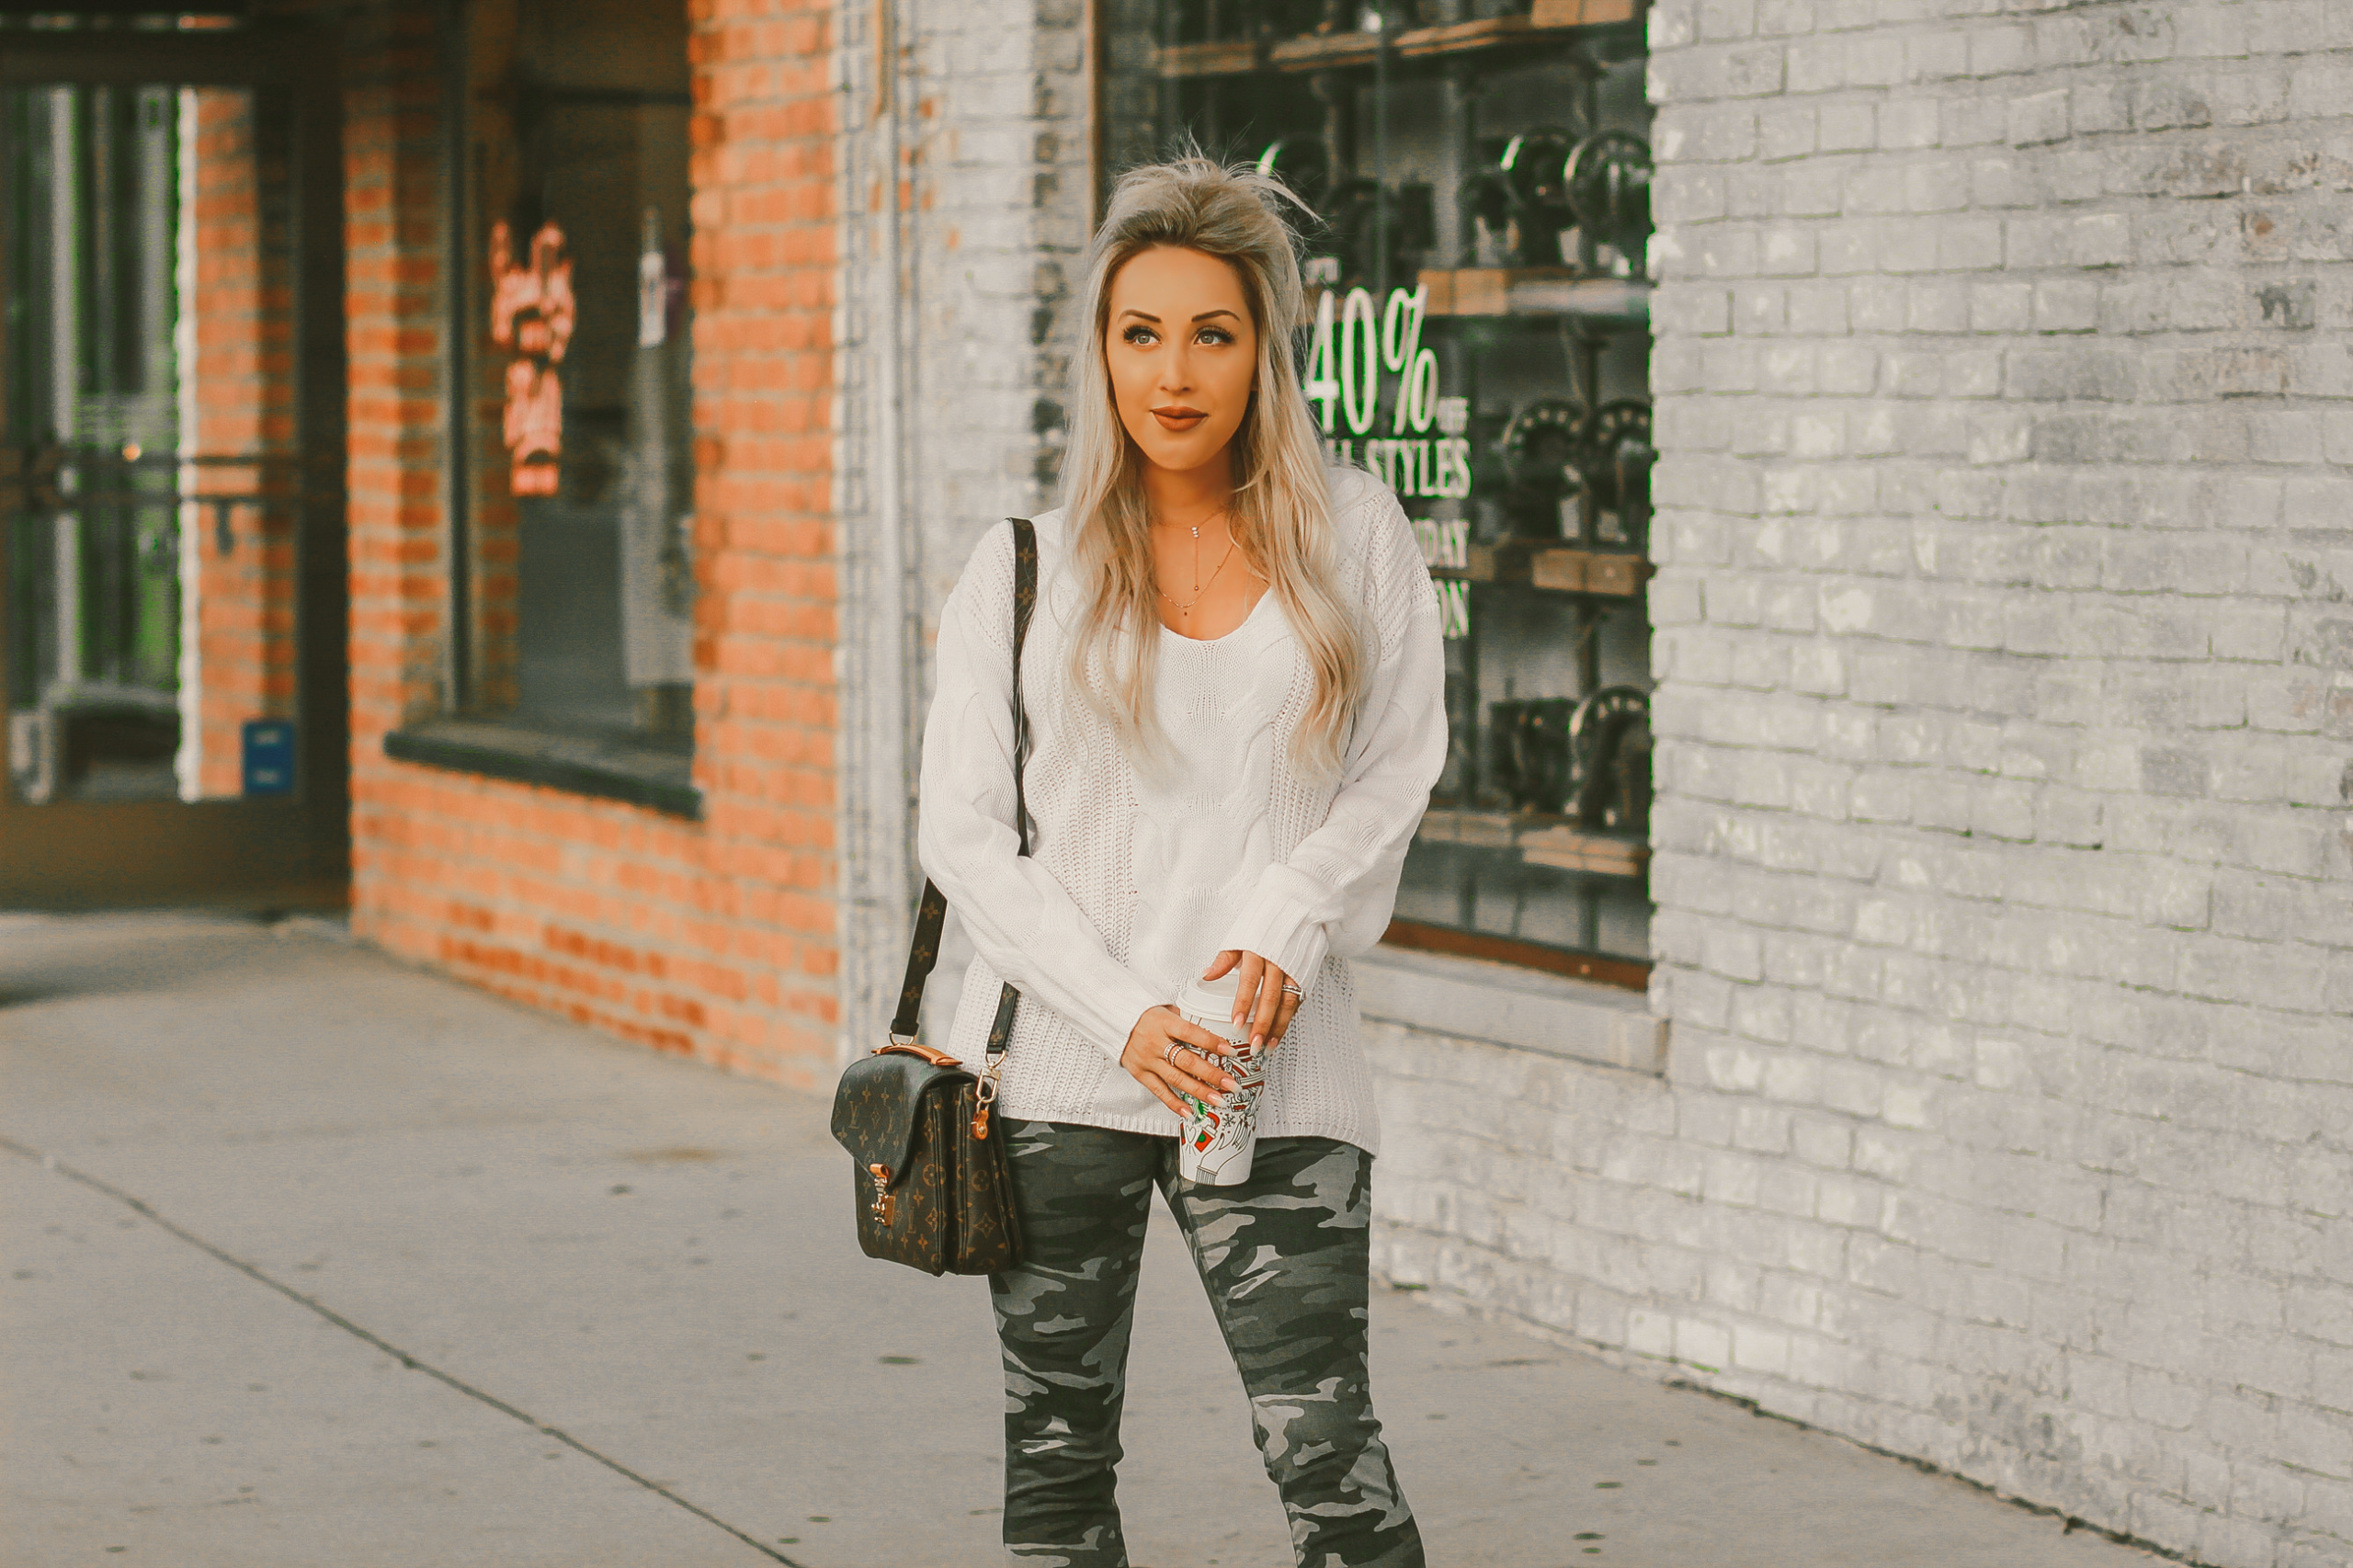 Blondie in the City | Camouflage Jeans, White Sweater | Nude Louboutins, Louis Vuitton Bag | Fall Fashion